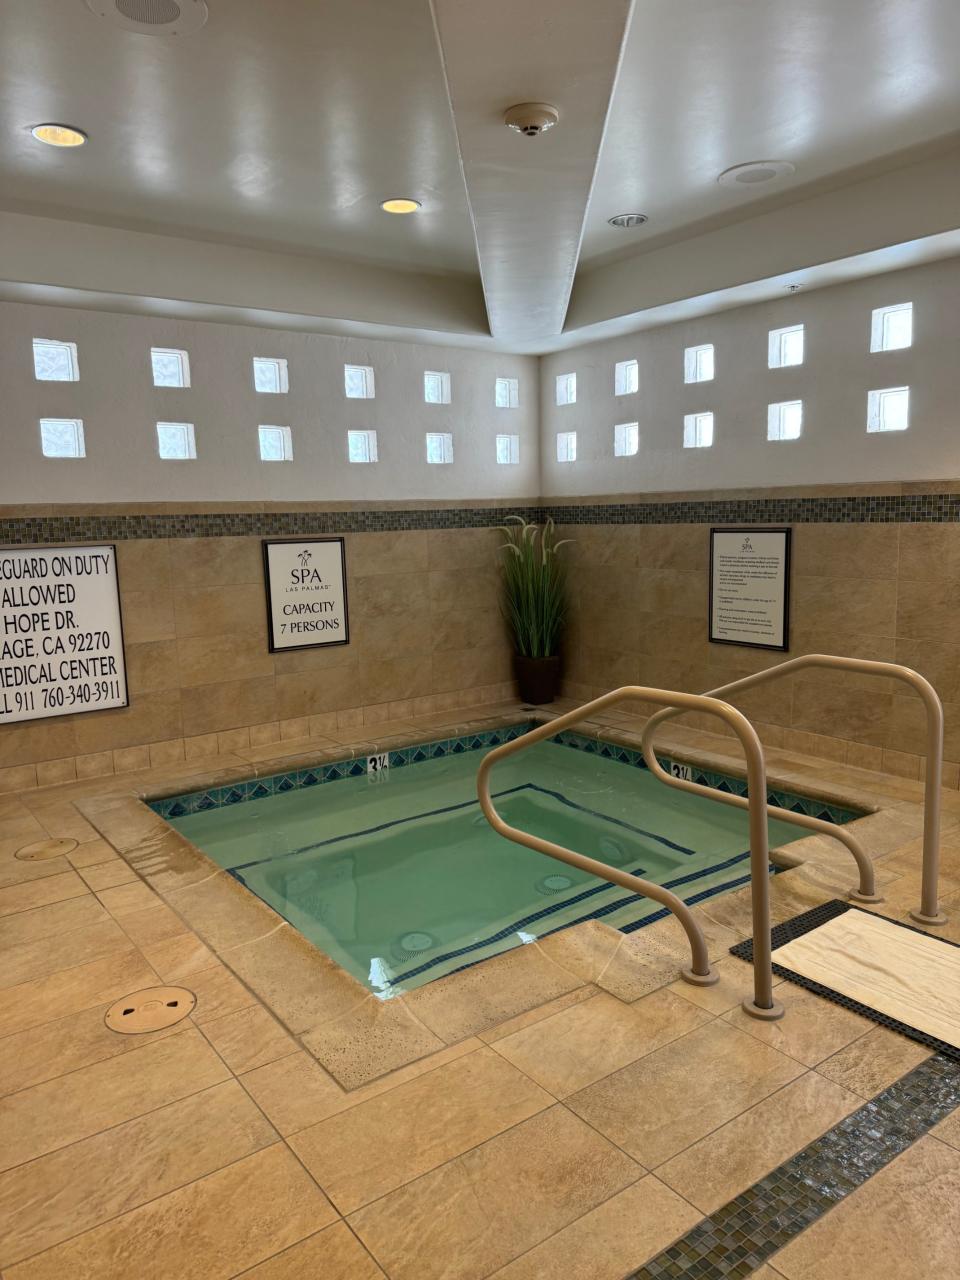 Indoor hotel spa with hot tub, safety signs, and no people present